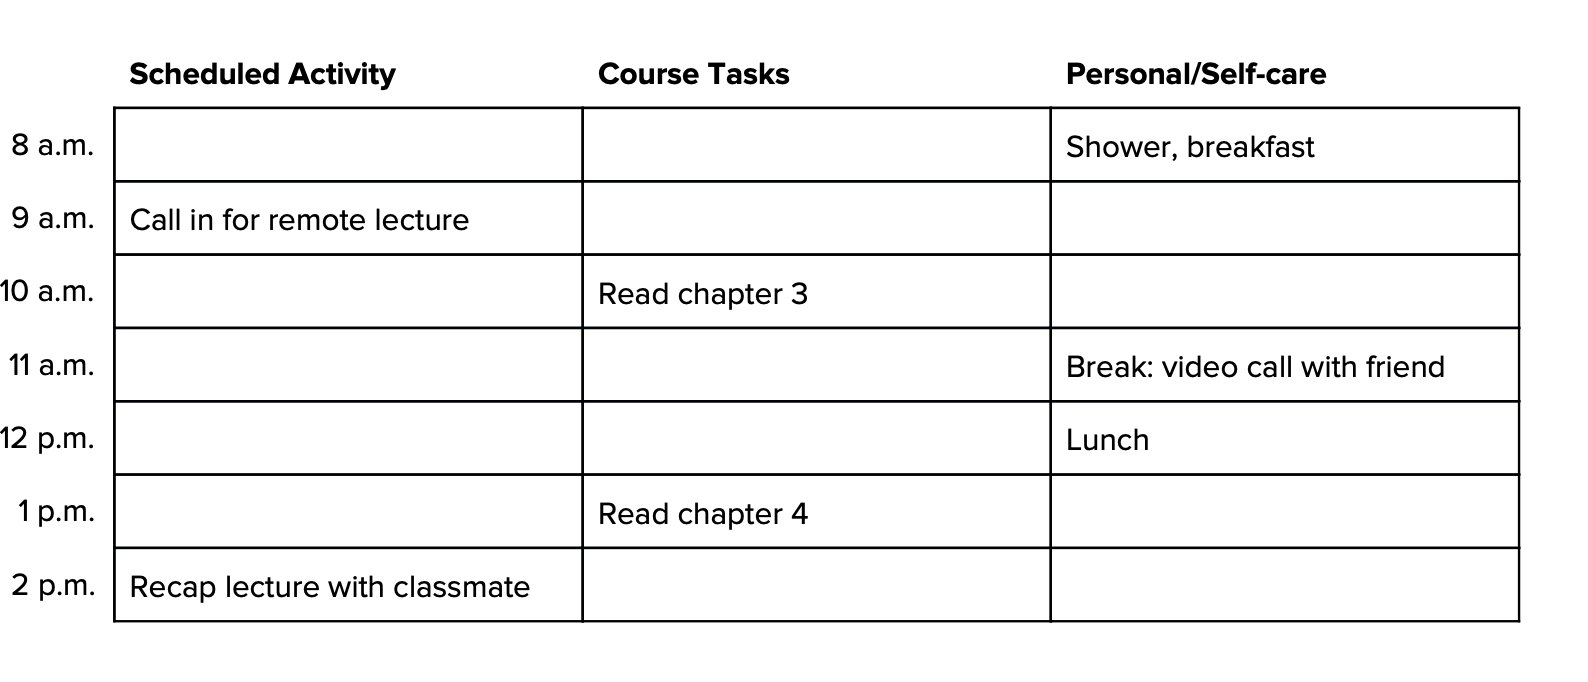 Image of a table with three columns and a row for each hour of the day. The columns are labeled "scheduled activity," "course tasks," and "personal/self-care" (from left to right). Examples of activities are in several cells: "shower, breakfast" appears in the row for 8 a.m. under the "personal/self-care" column, and "call in for remote lecture" appears in the row for 9 a.m. in the "scheduled activity" column.